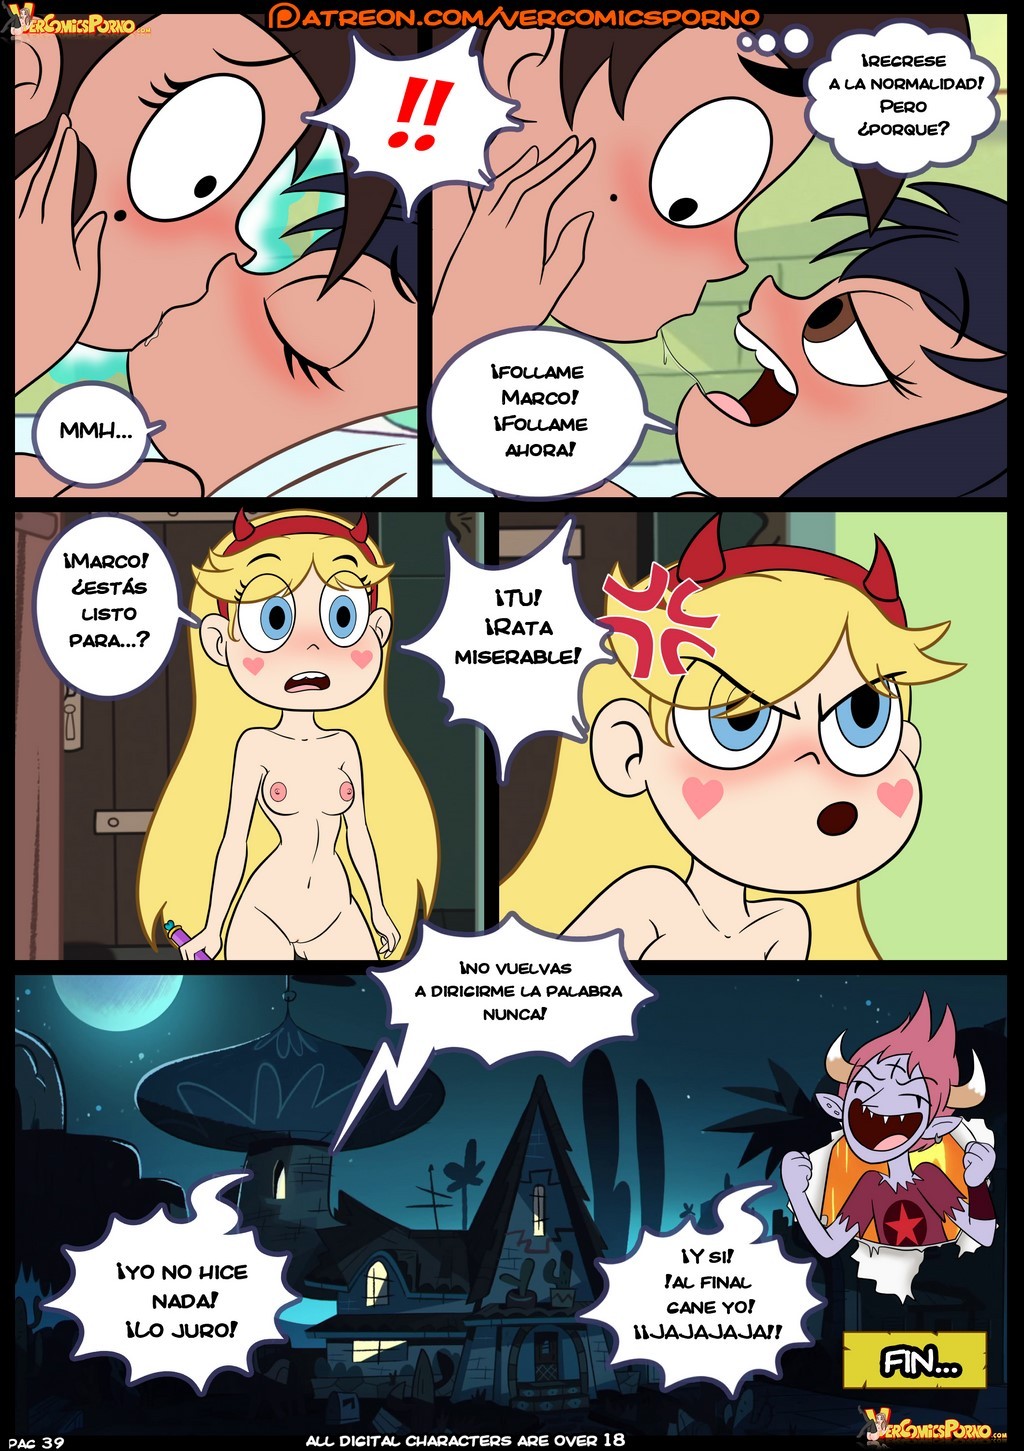 Post 2556793 Comic Janna Ordonia Marco Diaz Star Butterfly Star Vs The Forces Of Evil Tom